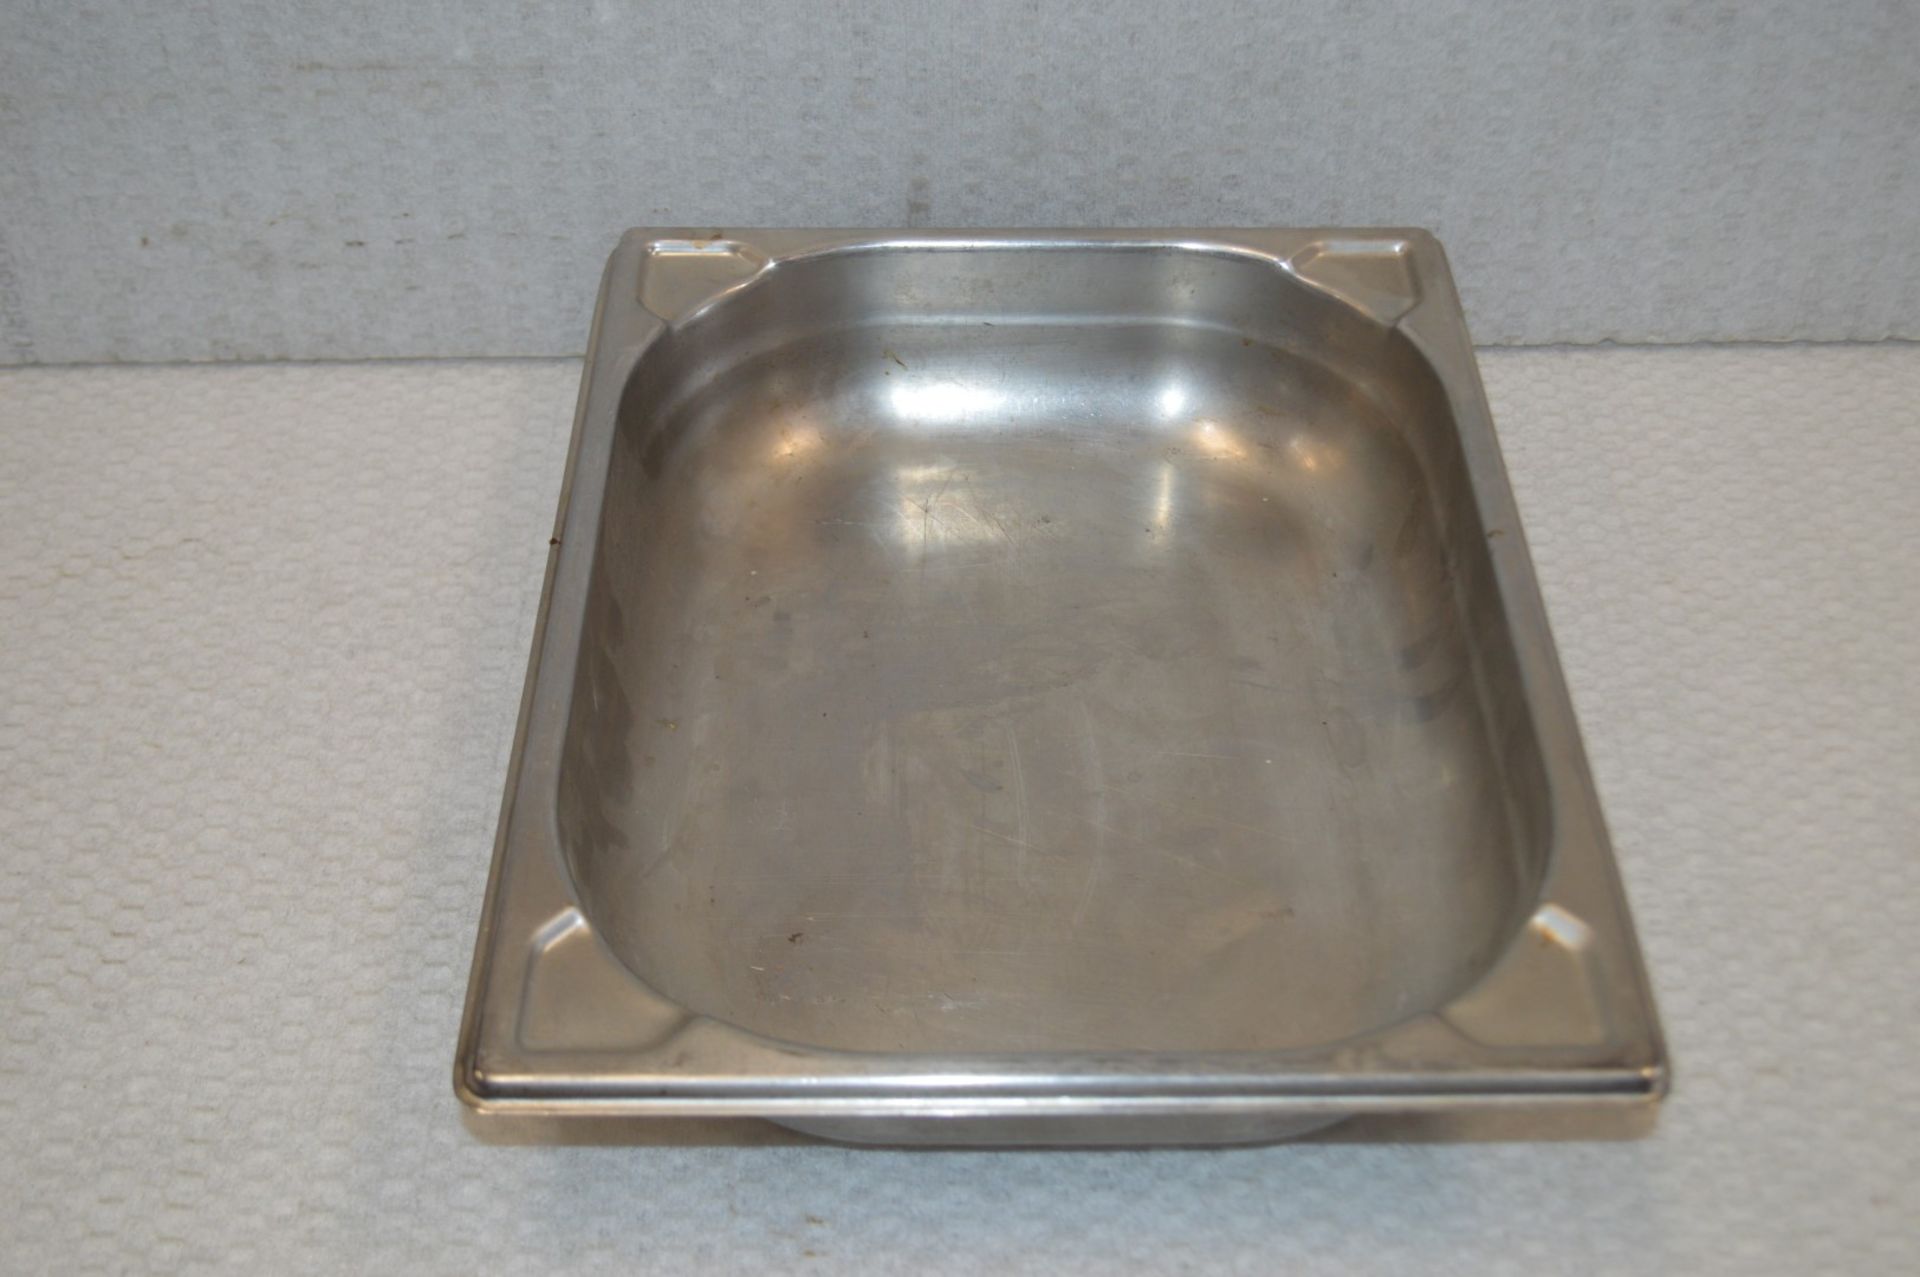 10 x Stainless Steel Gastronorm Trays - Dimensions: L33 x W26.5 cm - Includes Perforated and None - Image 2 of 3